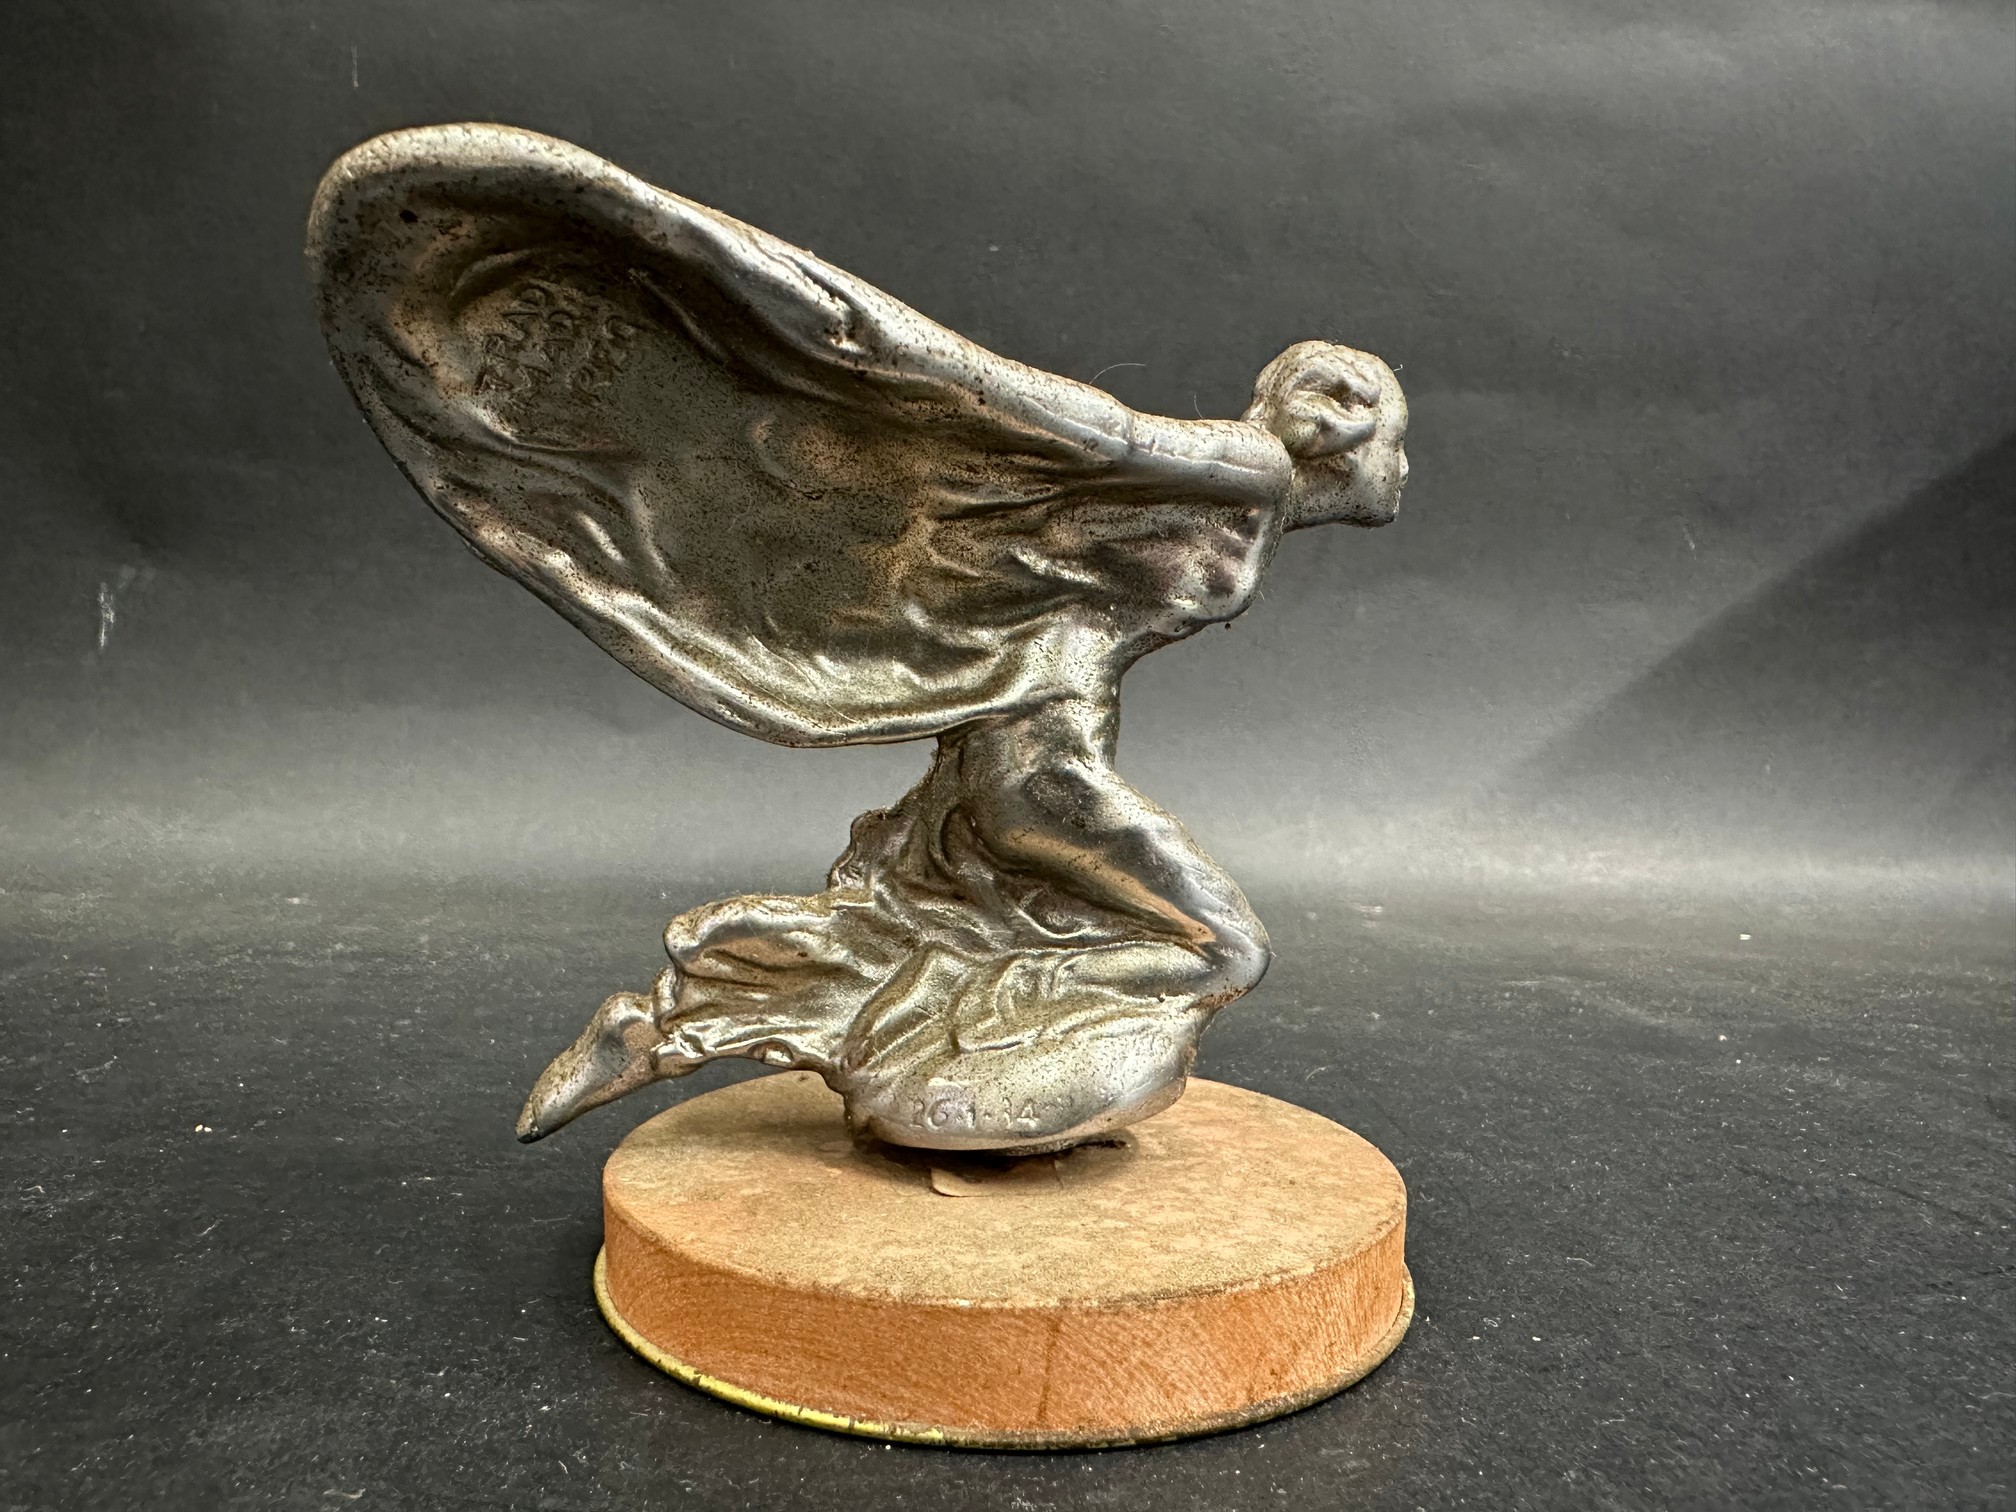 A Rolls-Royce kneeling lady car mascot inscribed 26.1.34 and signed C. Sykes, approx. 3 3/4" high